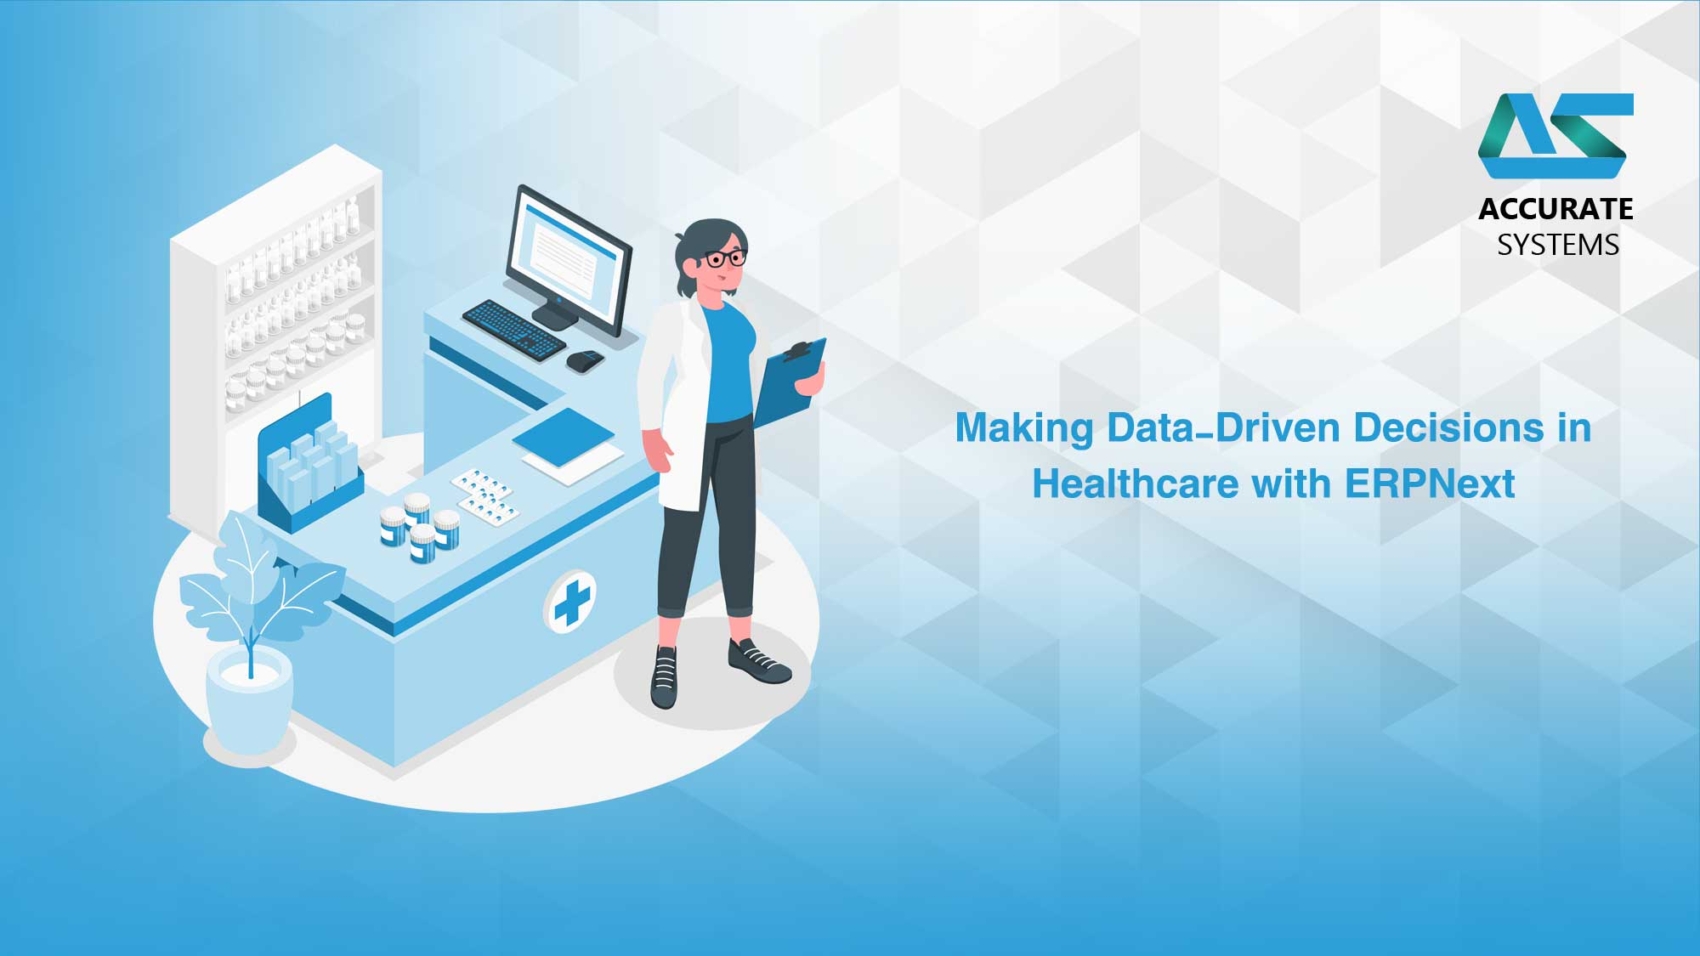 Data-Driven Decisions in Healthcare with ERPNext